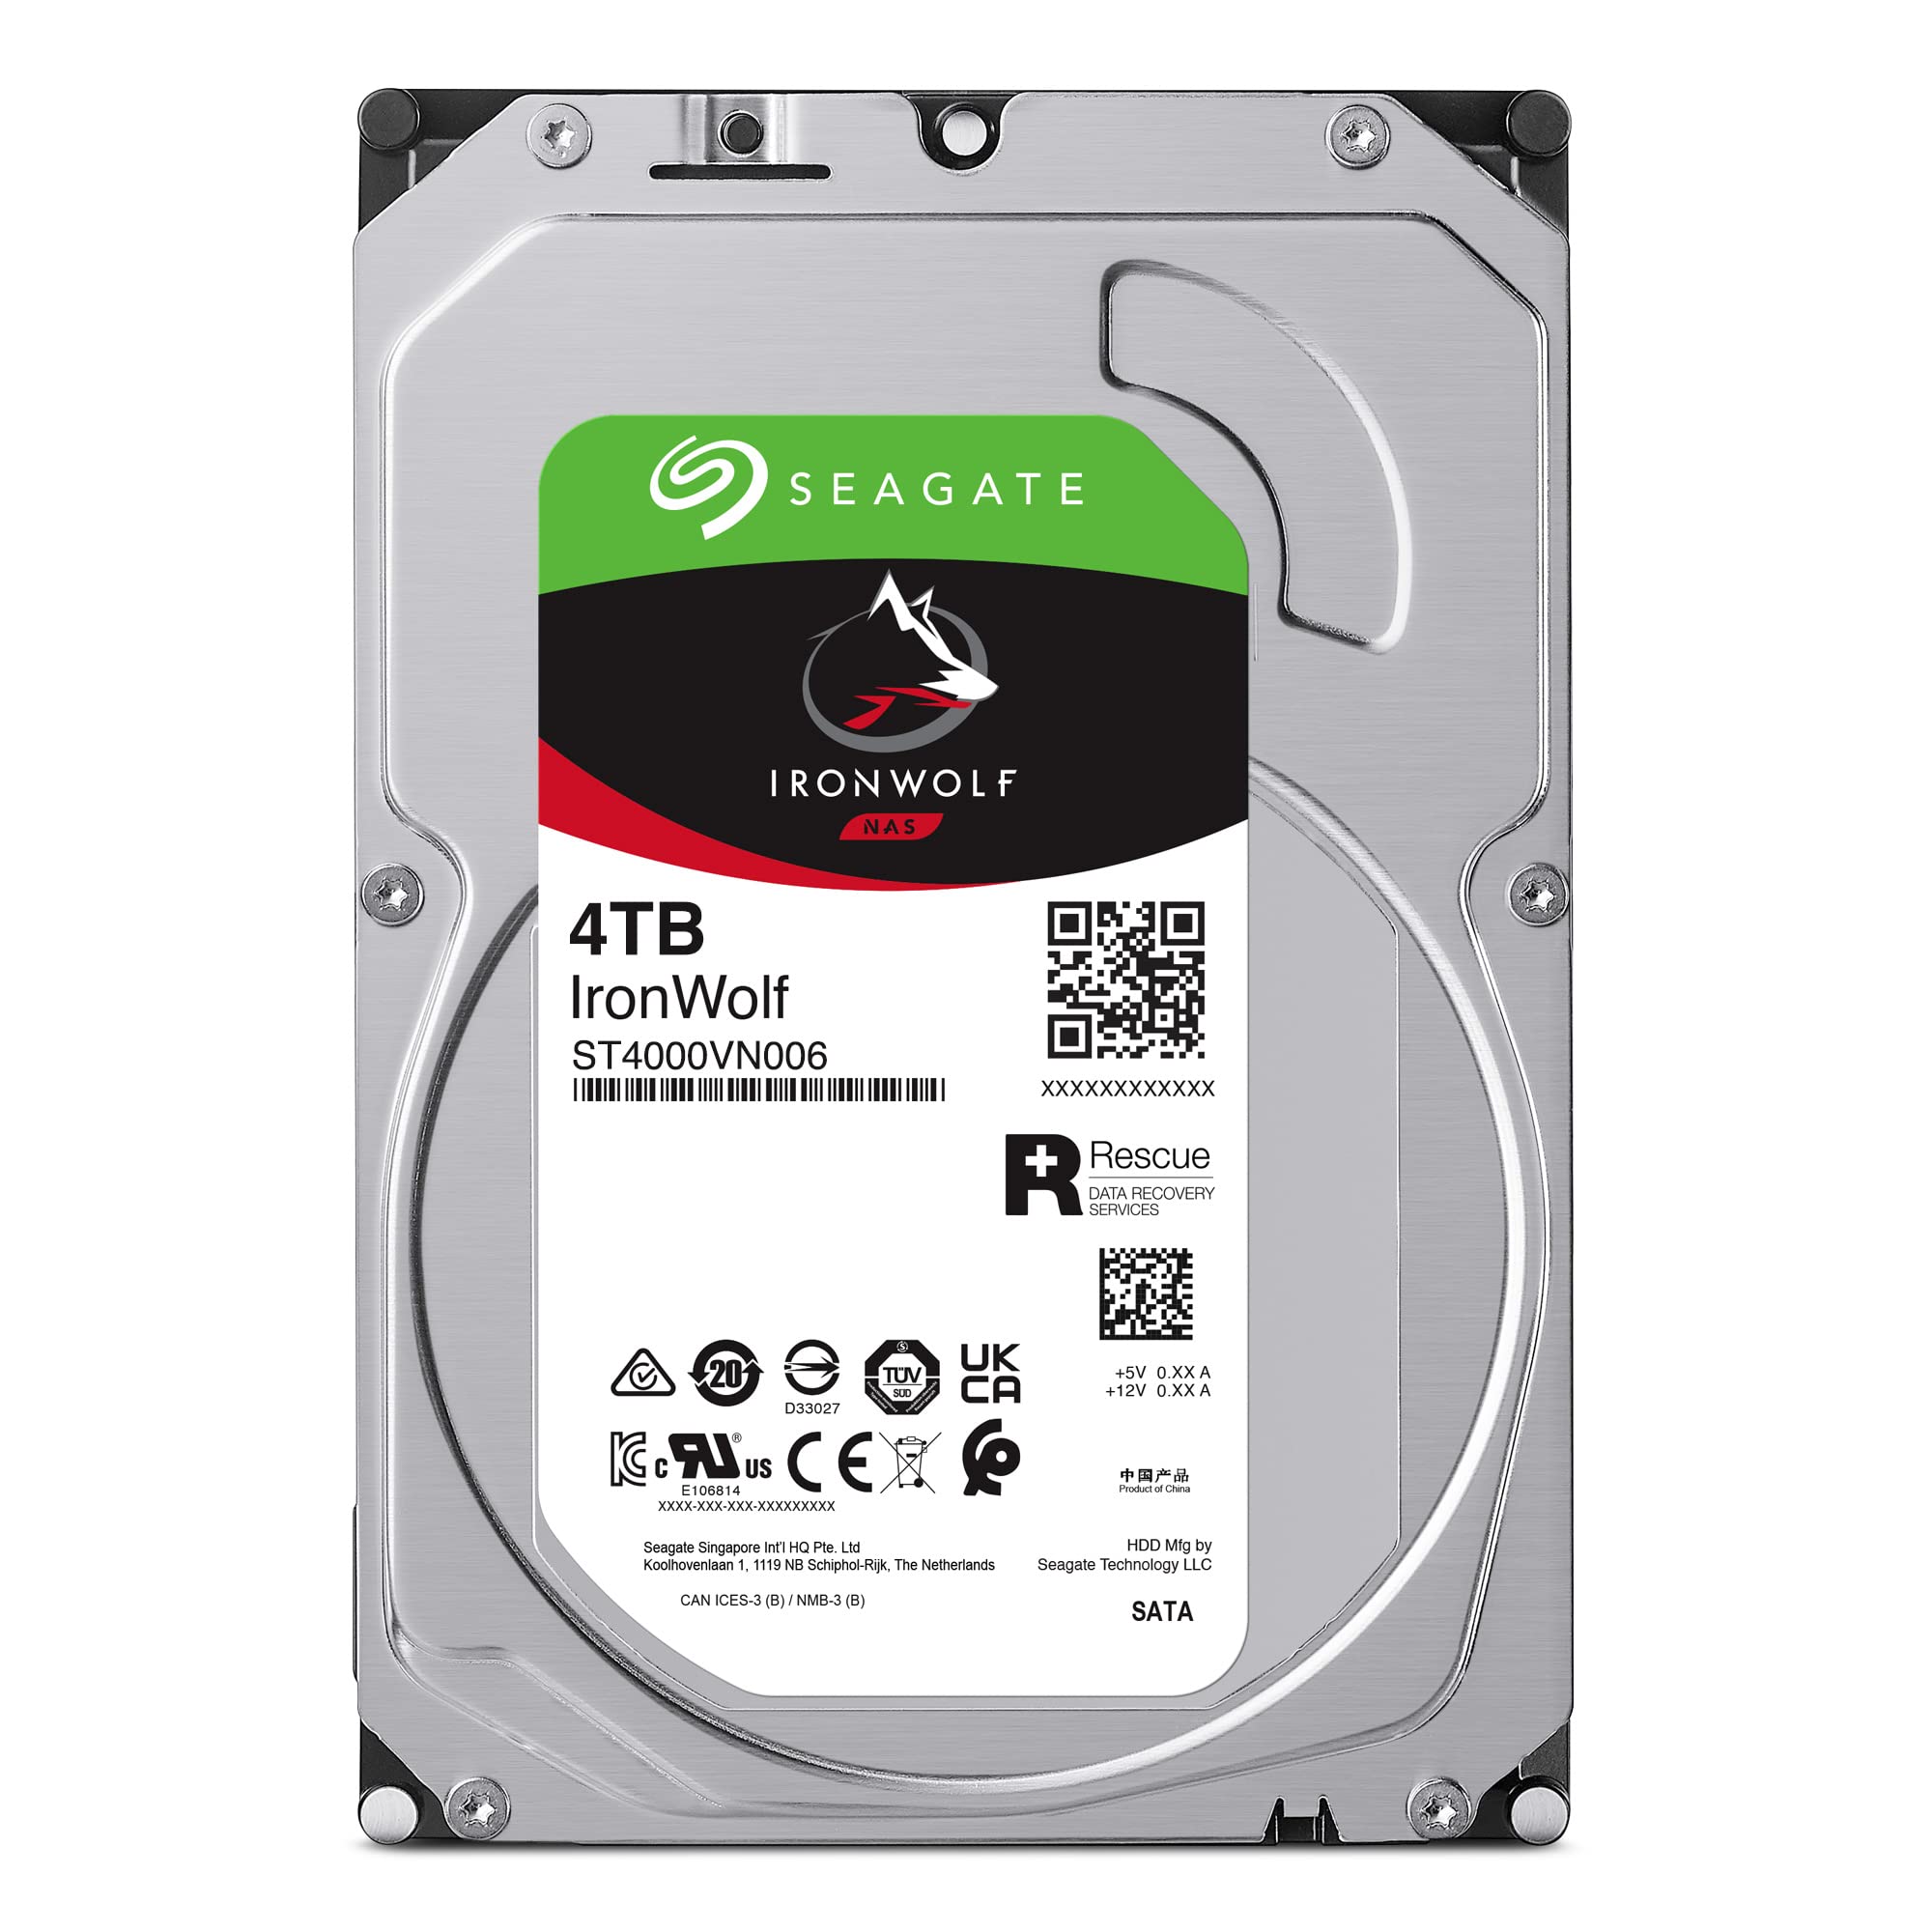 Seagate IronWolf 4TB NAS Internal Hard Drive HDD – CMR 3.5 Inch SATA 6Gb/s 5400 RPM 64MB Cache for RAID Network Attached Storage, Rescue Services – Frustration Free Packaging (ST4000VNZ06)